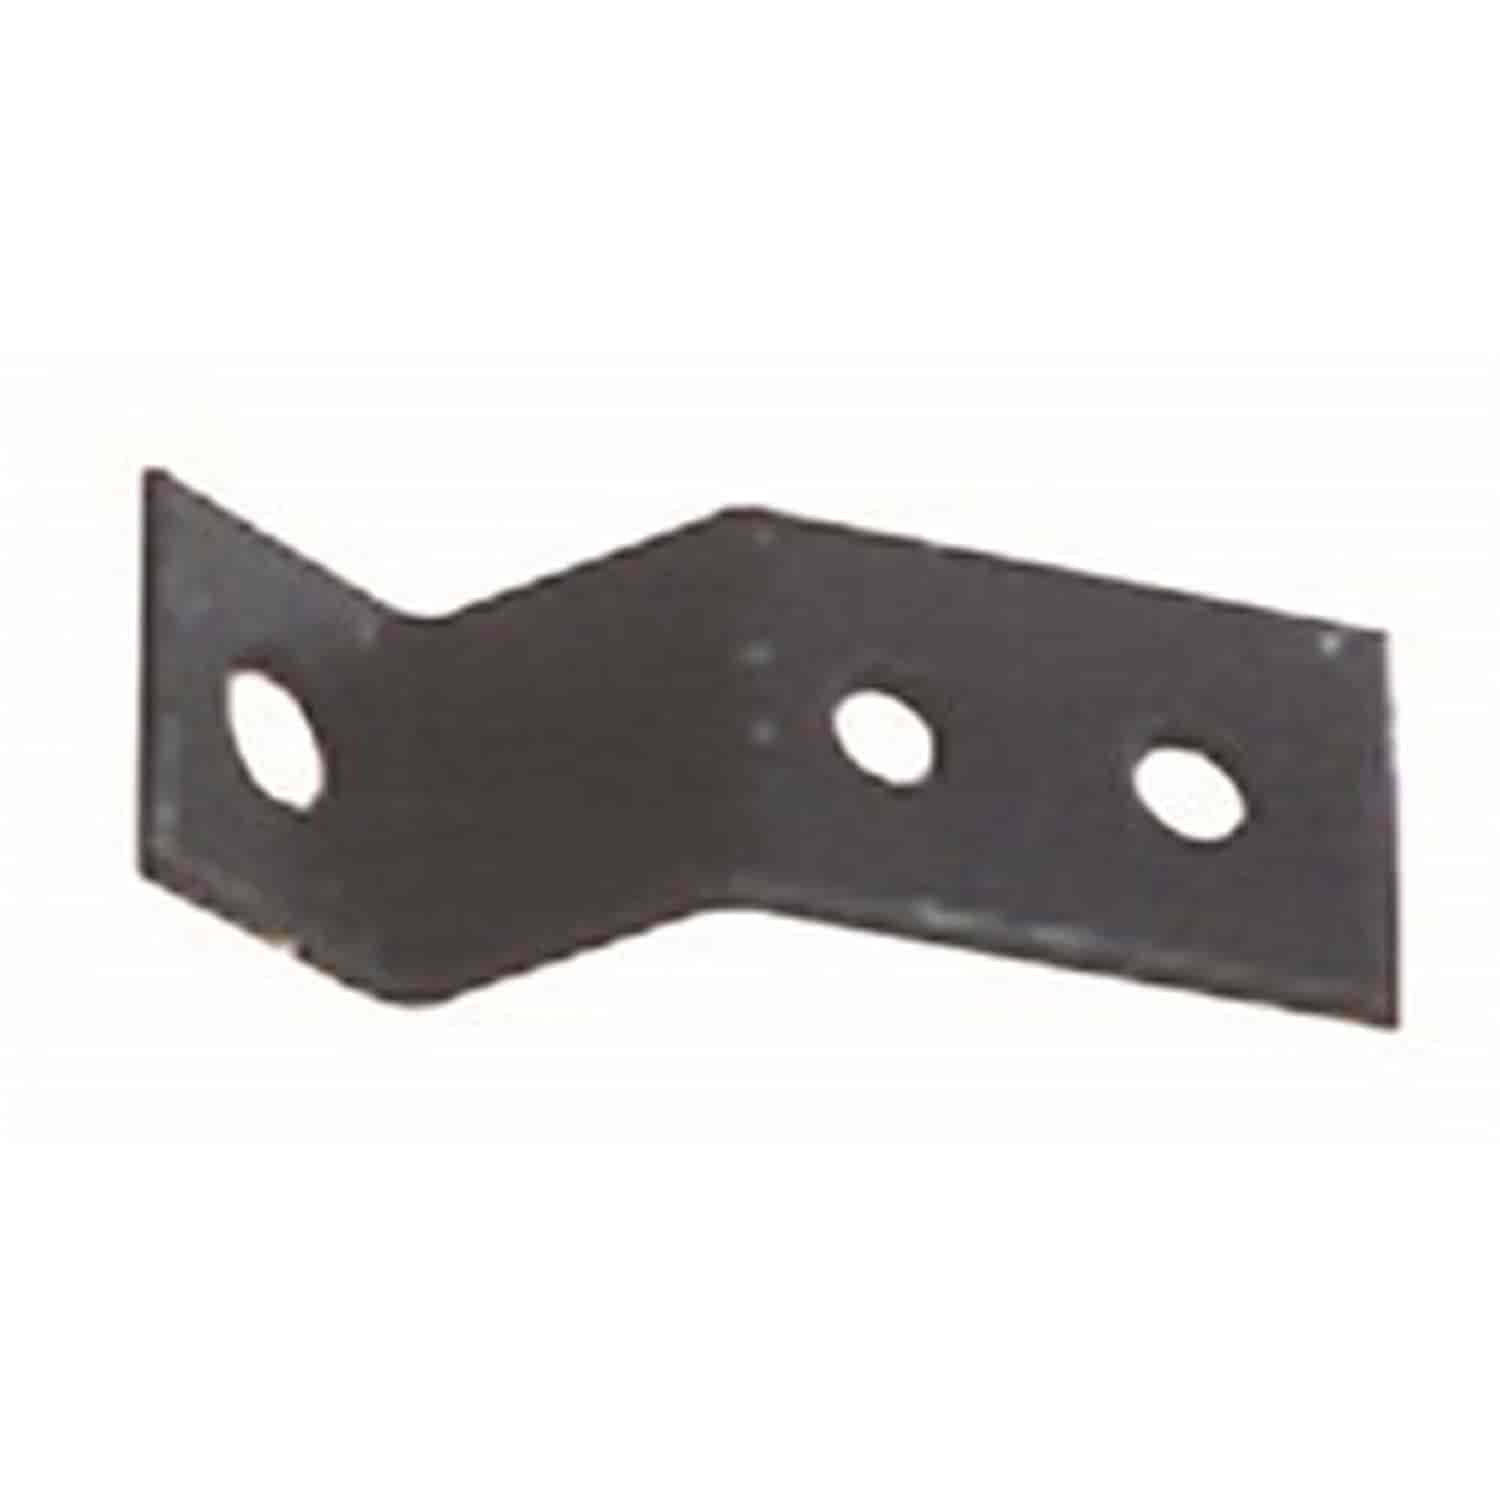 This machine gun mounting bracket from Omix-ADA fits 50-52 Willys M38.